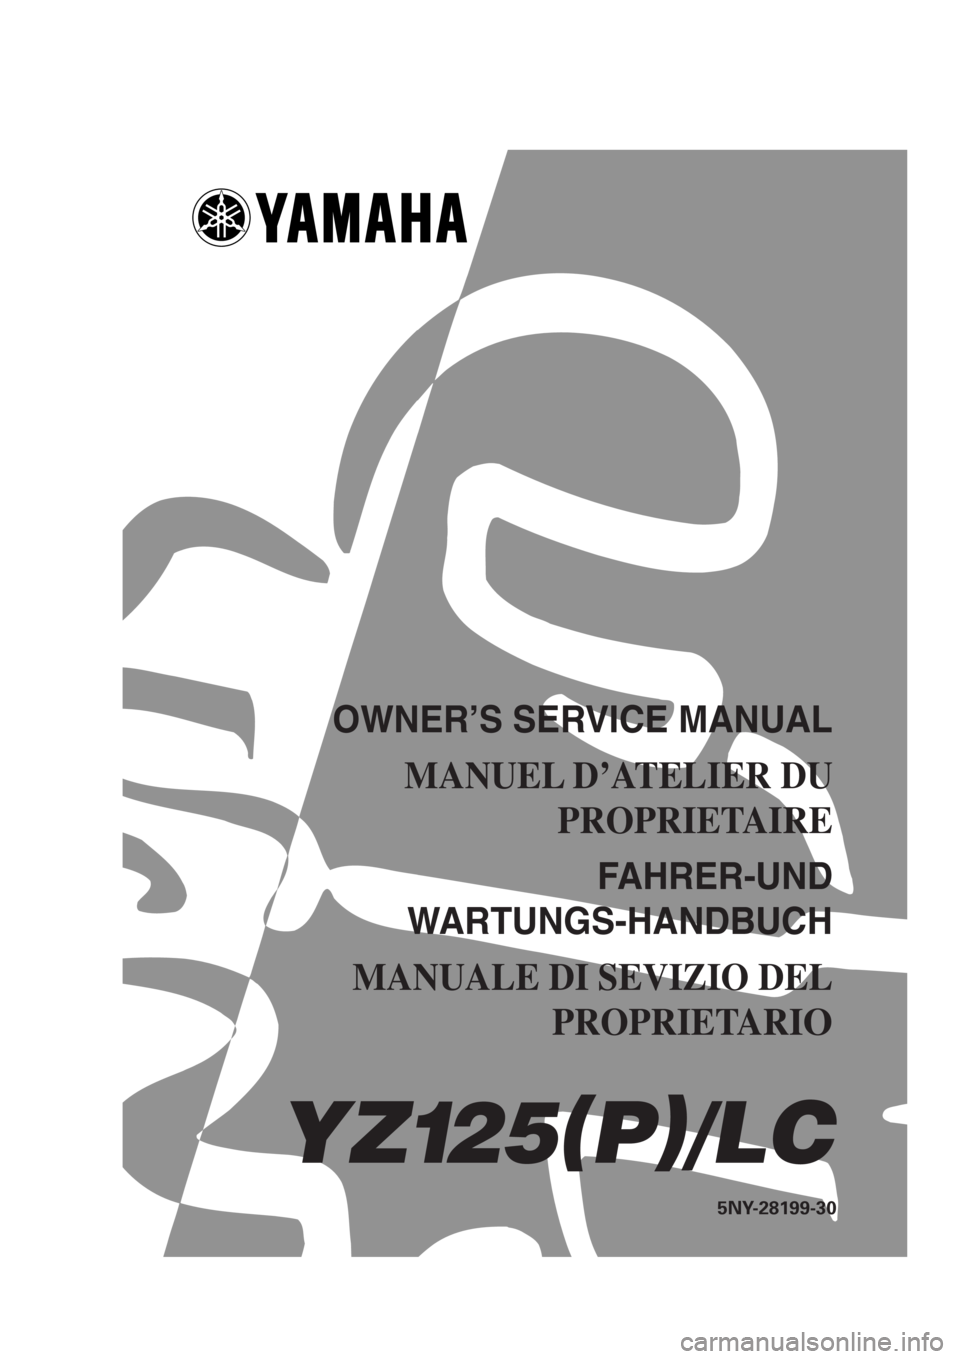 YAMAHA YZ125LC 2002  Owners Manual OWNER’S SERVICE MANUAL
MANUEL D’ATELIER DU 
PROPRIETAIRE
FAHRER-UND 
WARTUNGS-HANDBUCH
MANUALE DI SEVIZIO DEL
PROPRIETARI
O
YZ125(
P)
/LC
5NY-28199-30 JAPAN
8 ×1!H)
YZ125(
P)
/LC 